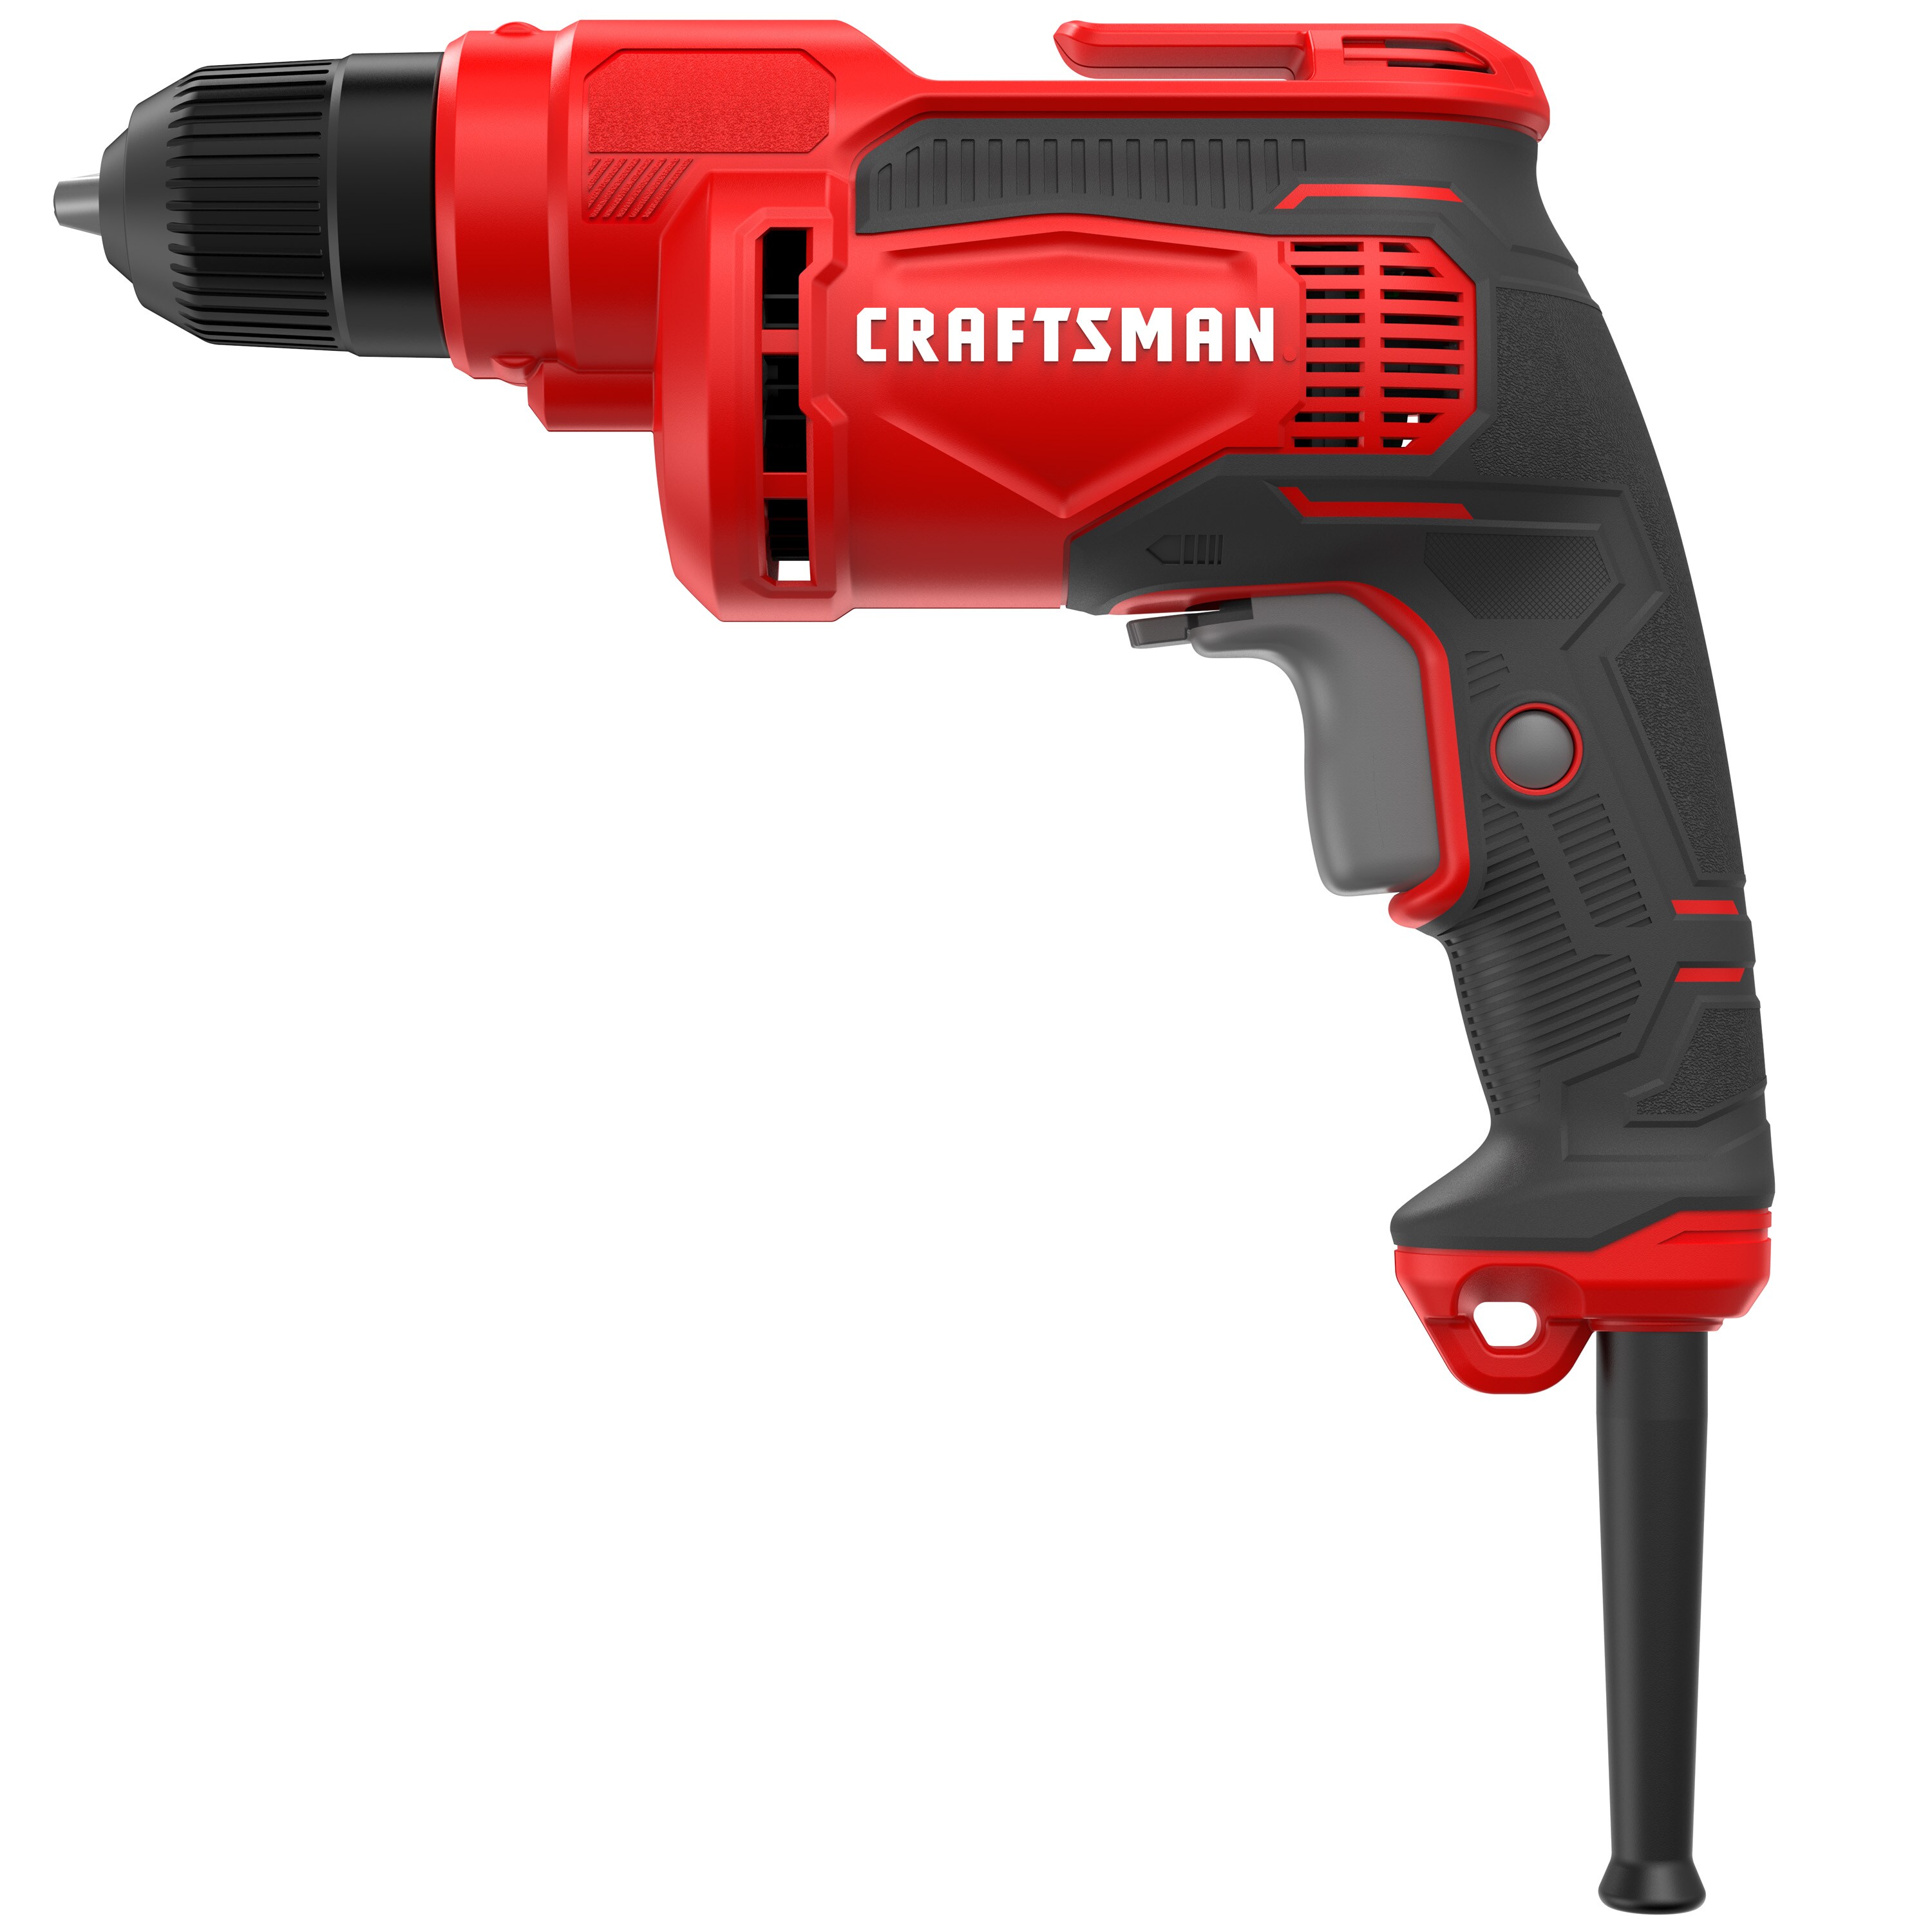 *New* CRAFTSMAN 3/8 Inch 6A Corded DRILL Keyless Chuck Variable Speed Cord Guard 